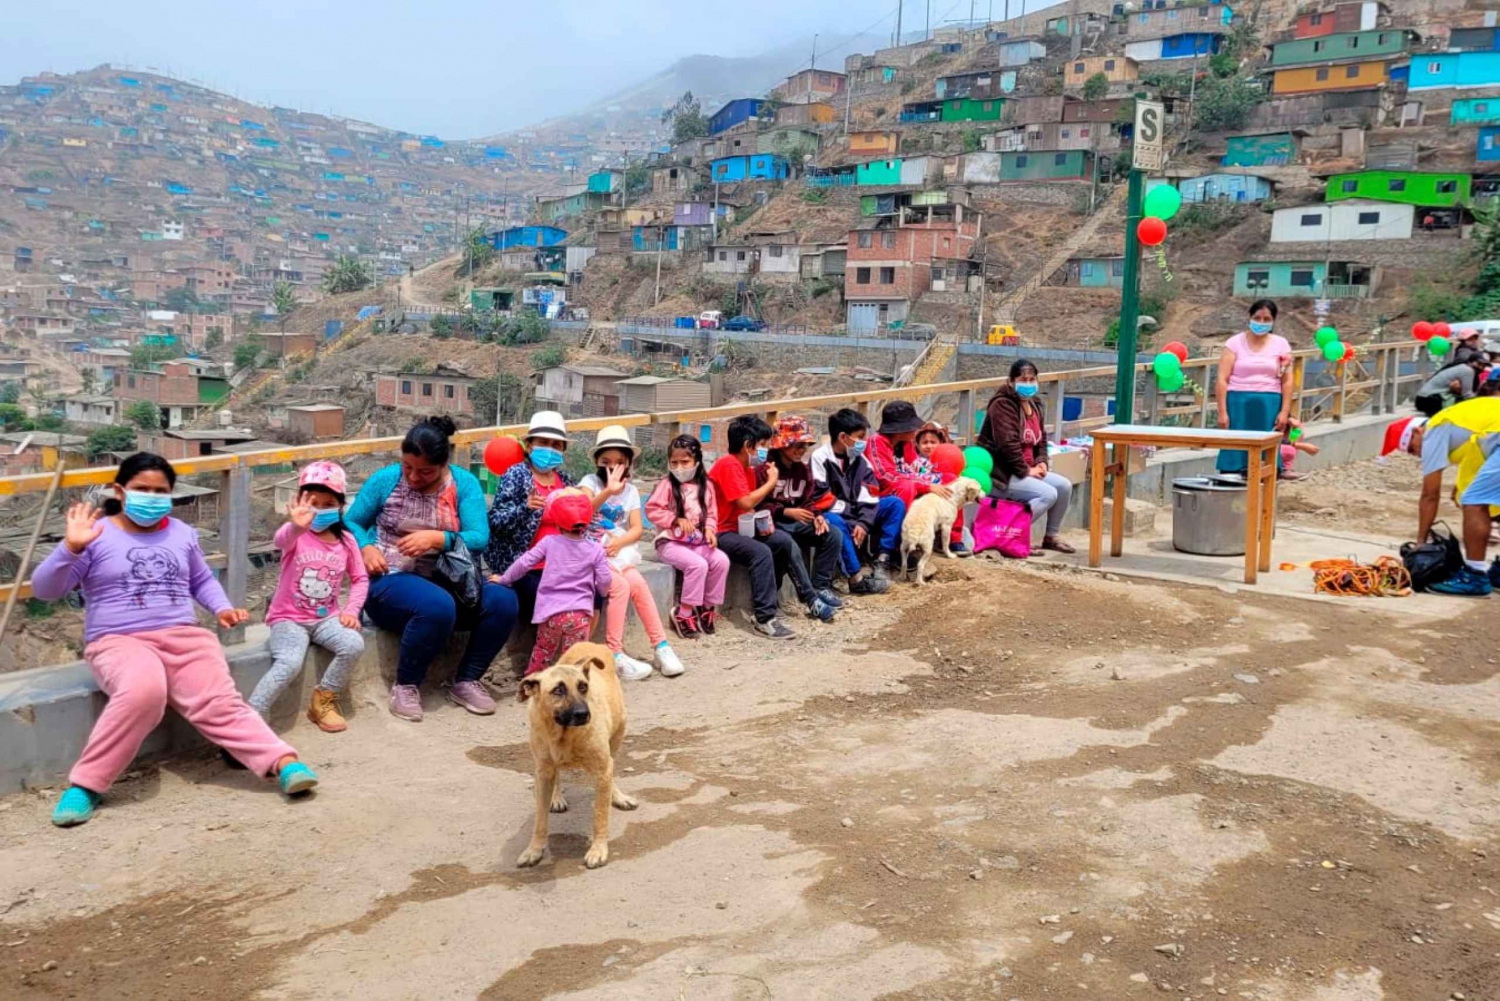 Lima: The Shanty Town Tour (Local Life Experience)